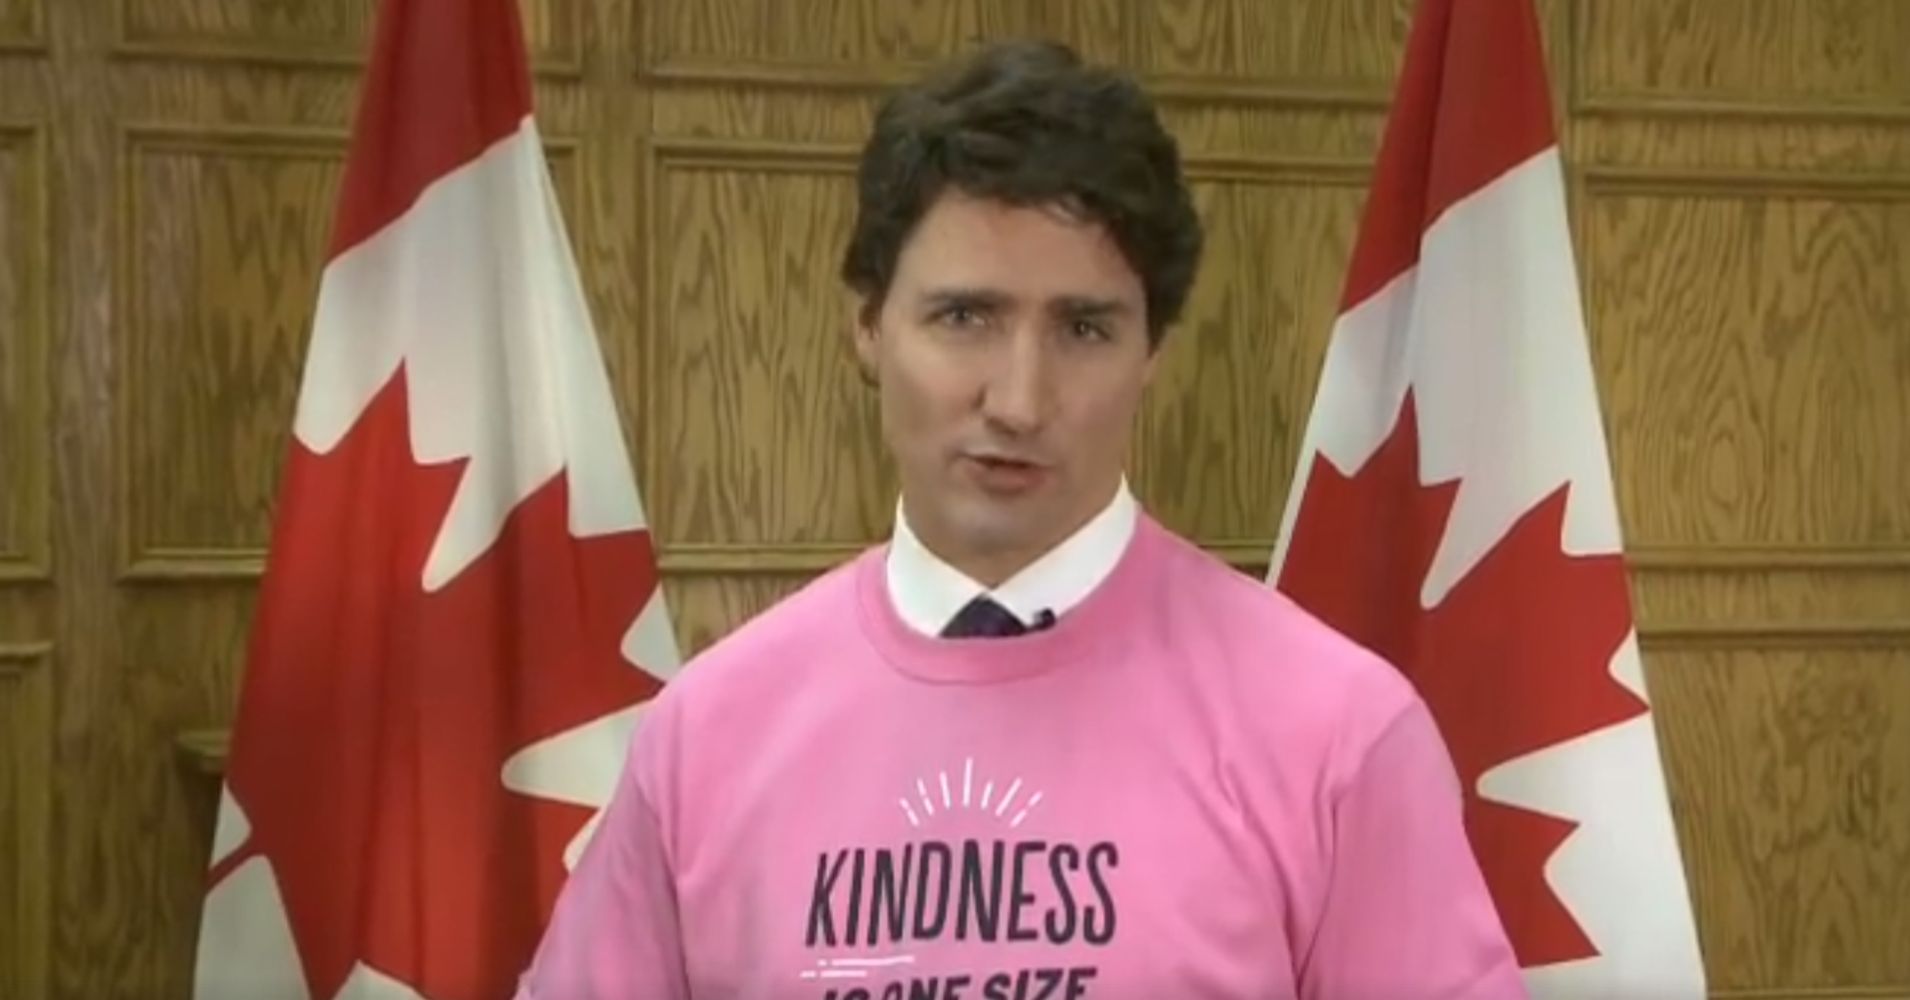 Watch Canada’s Prime Minister Explain Why His Pink Shirt Is So